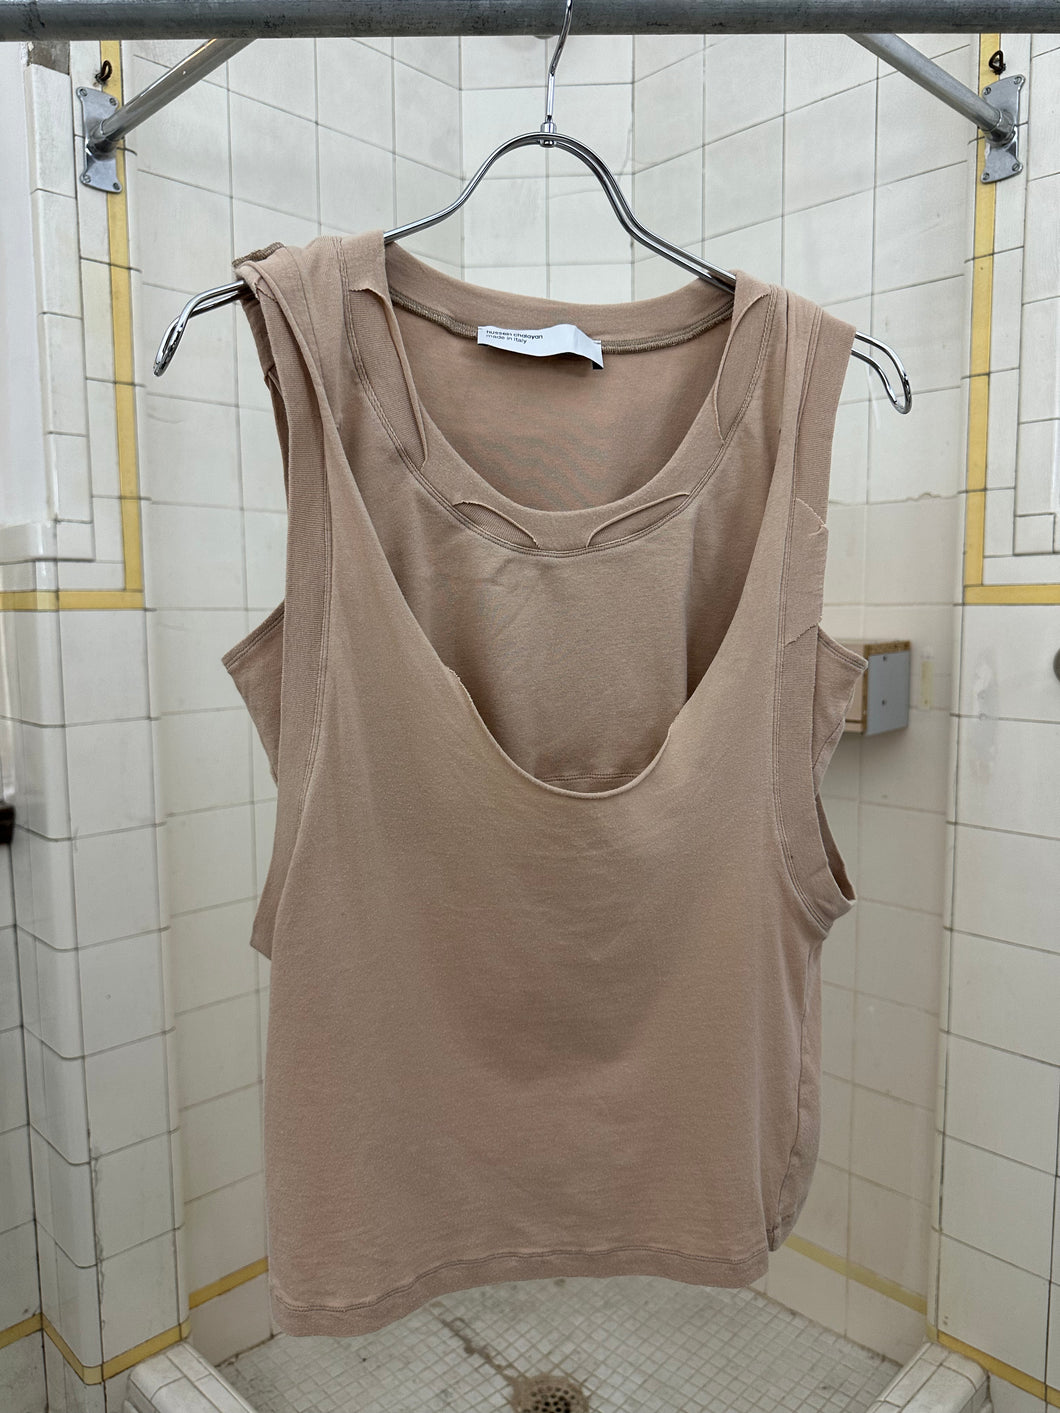 Vintage 2000s Hussein Chalayan Deformed Layered Tank - Size S